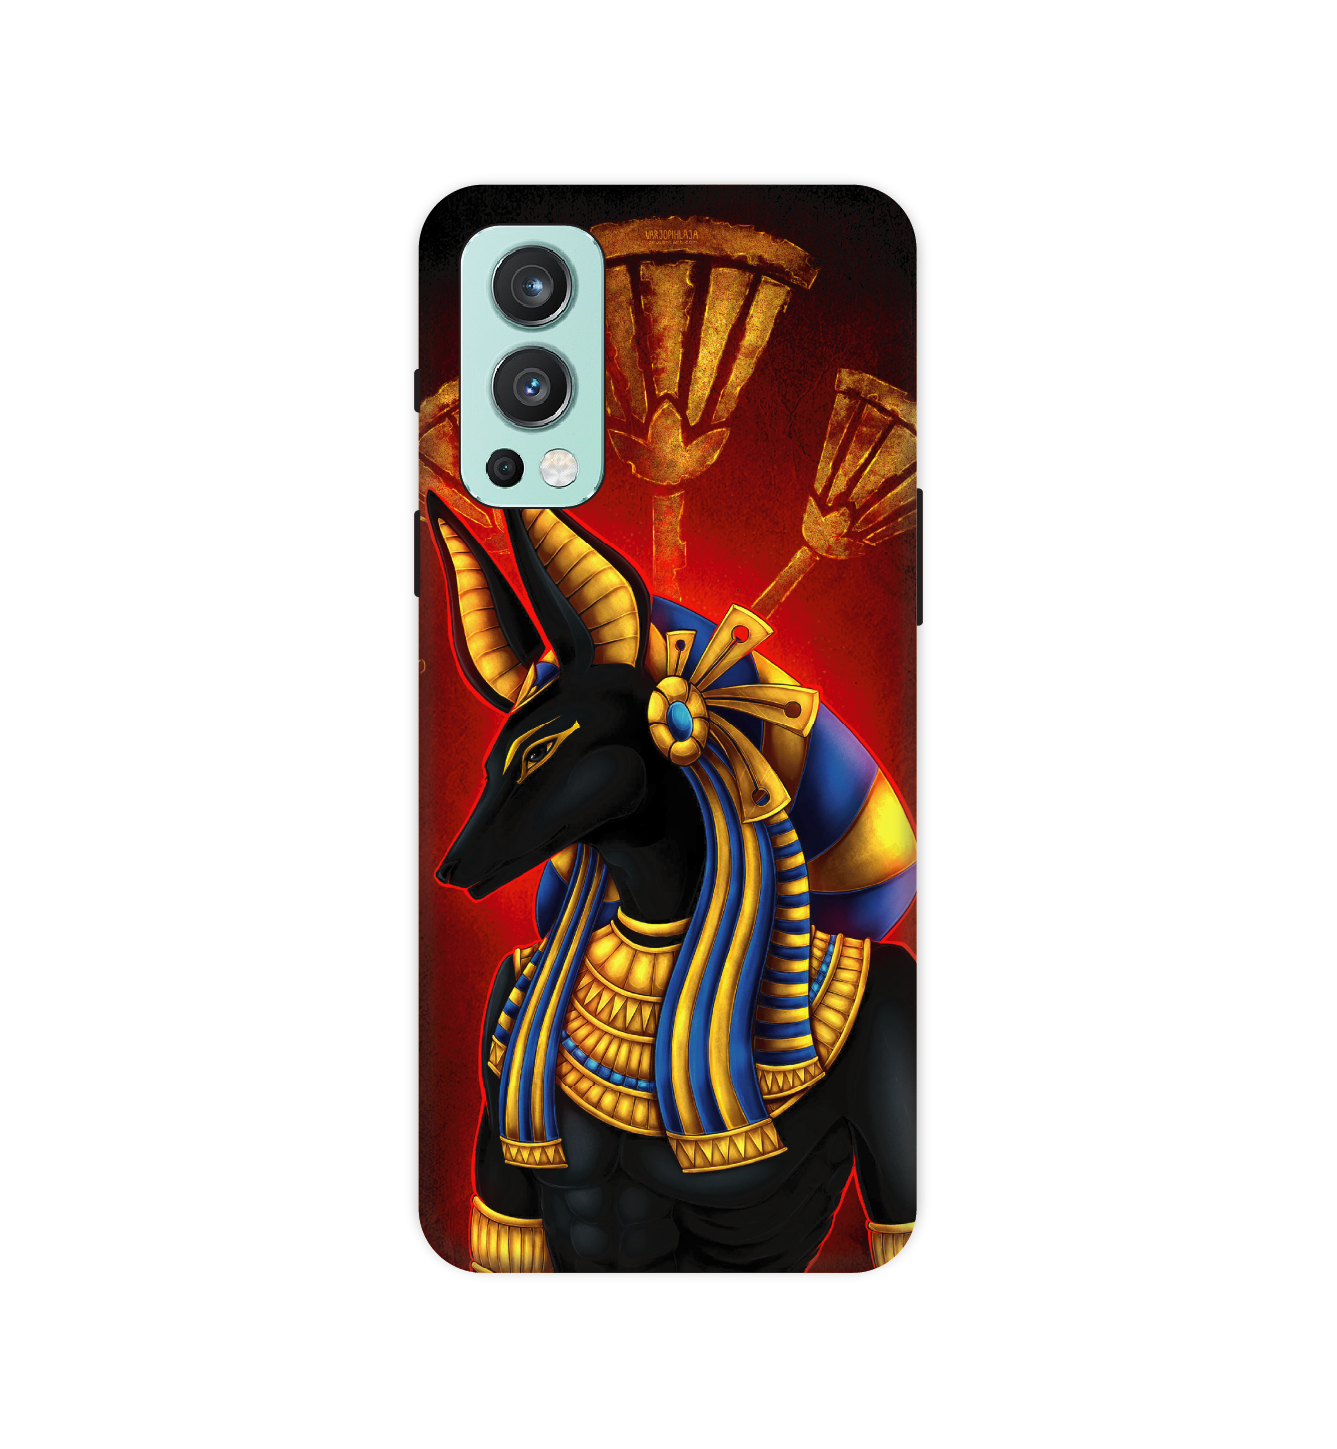 Anubis - Hard Cases For OnePlus Models